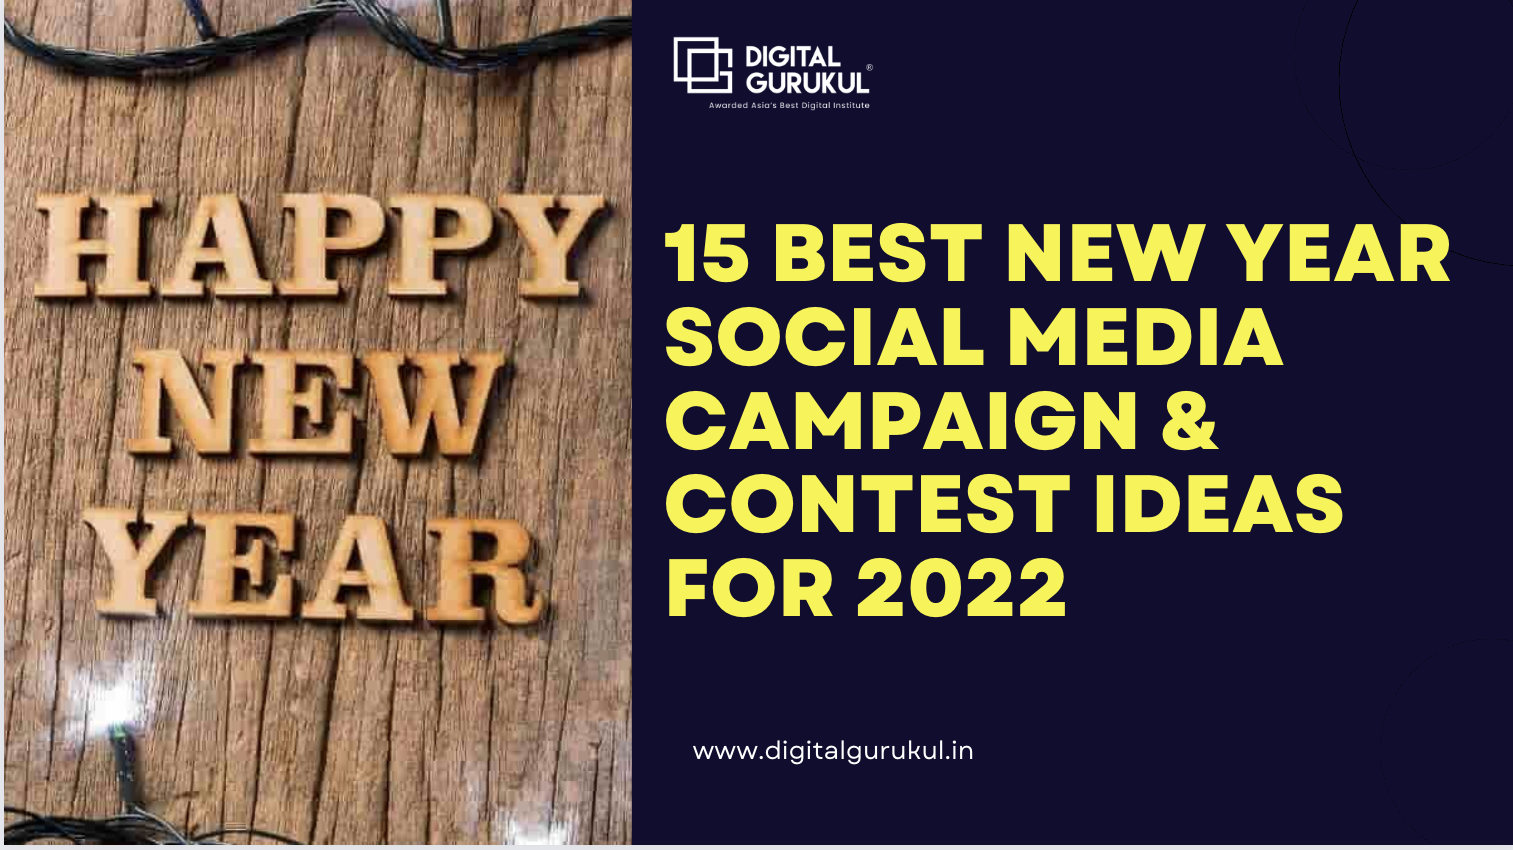 15 Best New Year Social Media Campaign & Contest Ideas For 2022